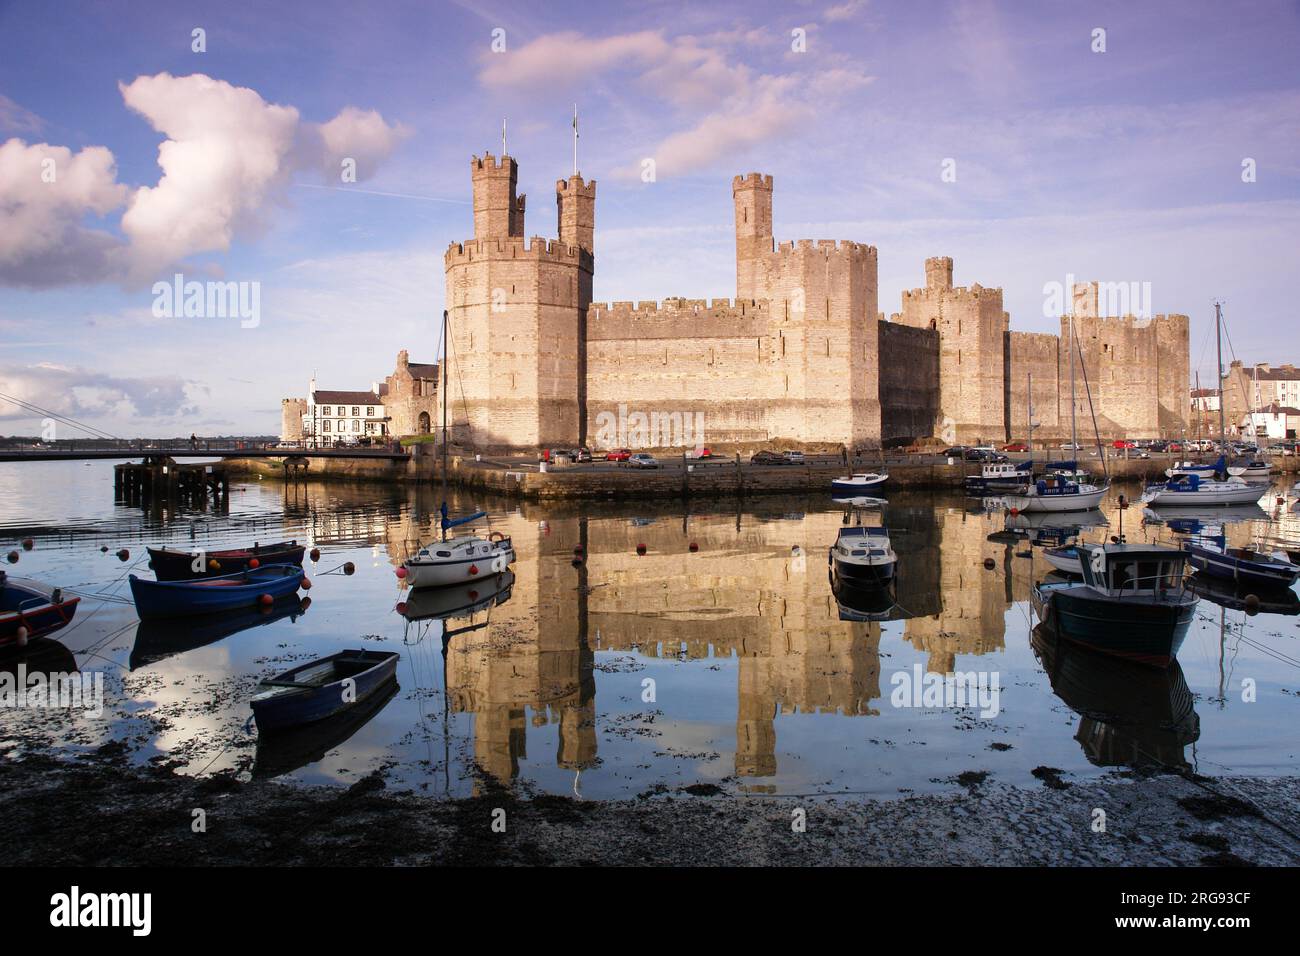 View of Caernarfon (Caernarvon) Castle in Gwynedd, North Wales, with numerous boats on the water in the foreground.  The castle was built by the English King Edward I from around 1283, on the site of a Roman fortress and Norman motte. Stock Photo